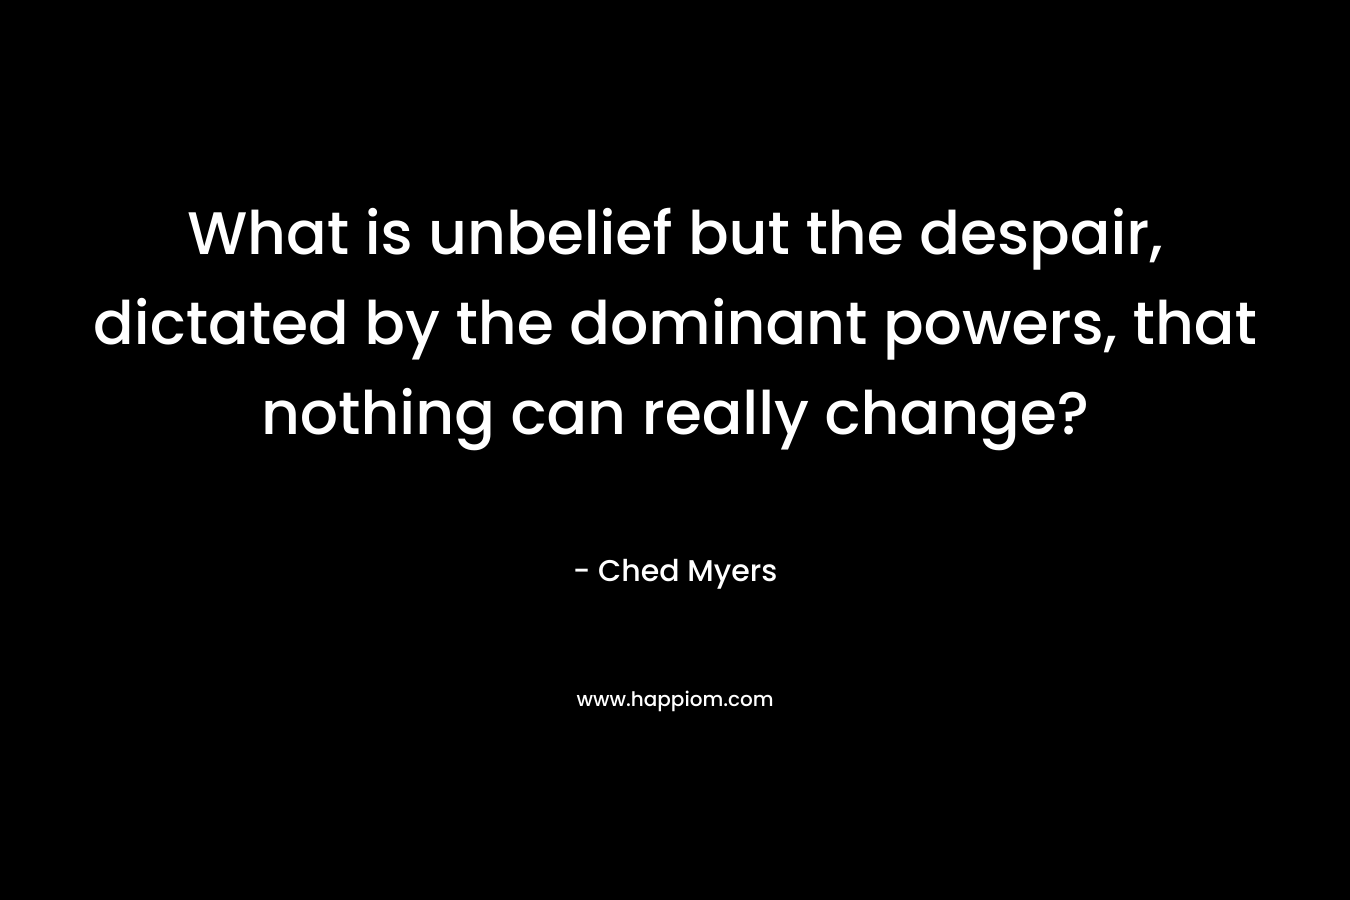 What is unbelief but the despair, dictated by the dominant powers, that nothing can really change?